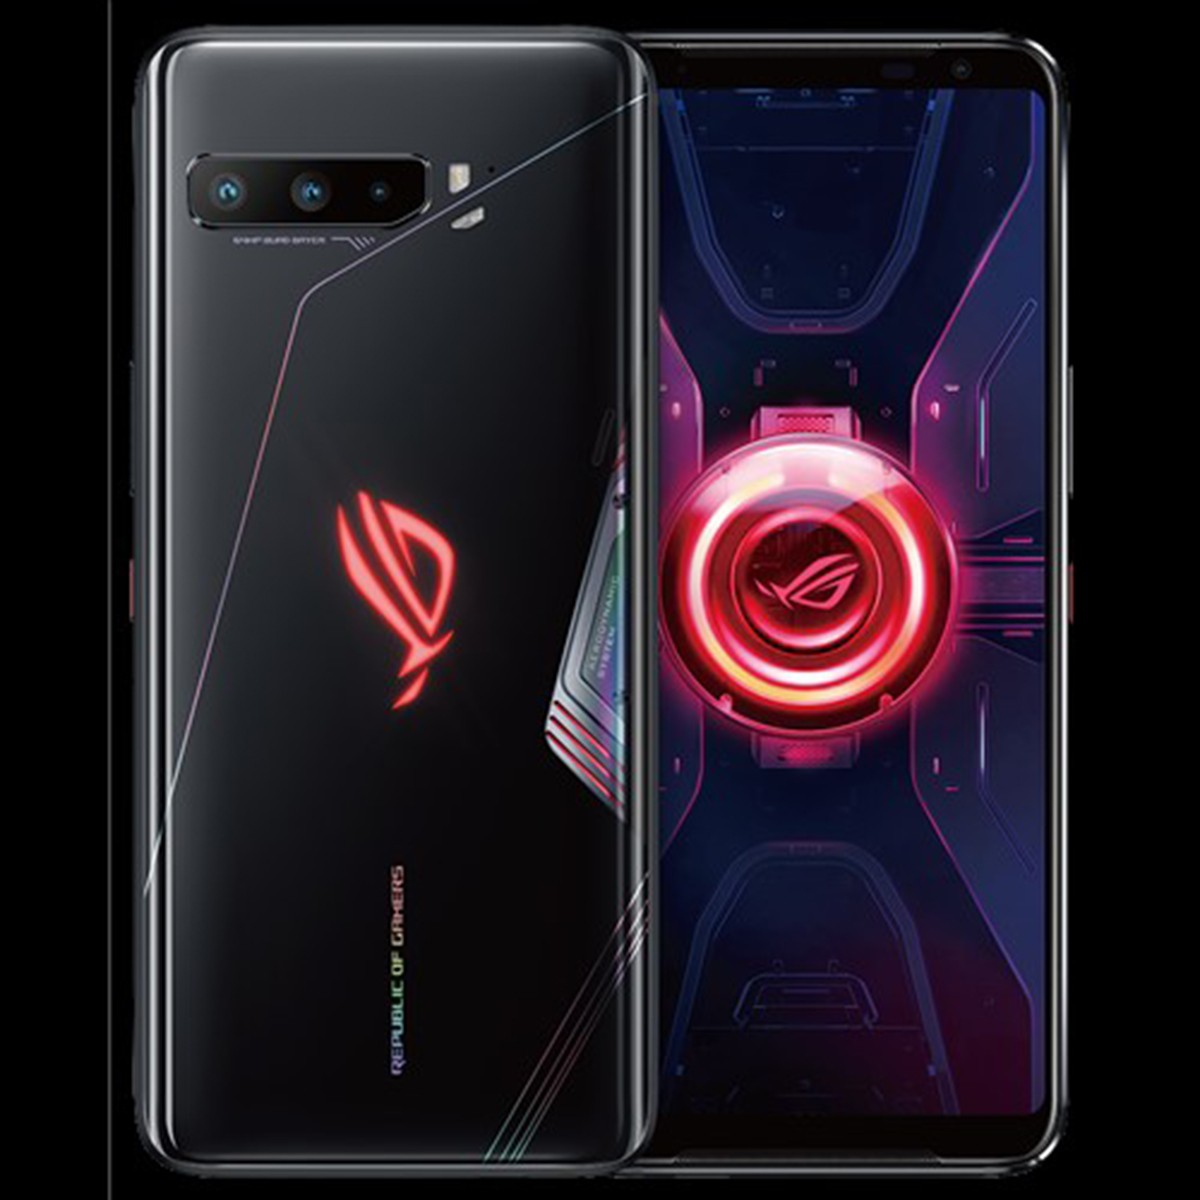 ASUS dévoile son smartphone gamer ROG Phone 3